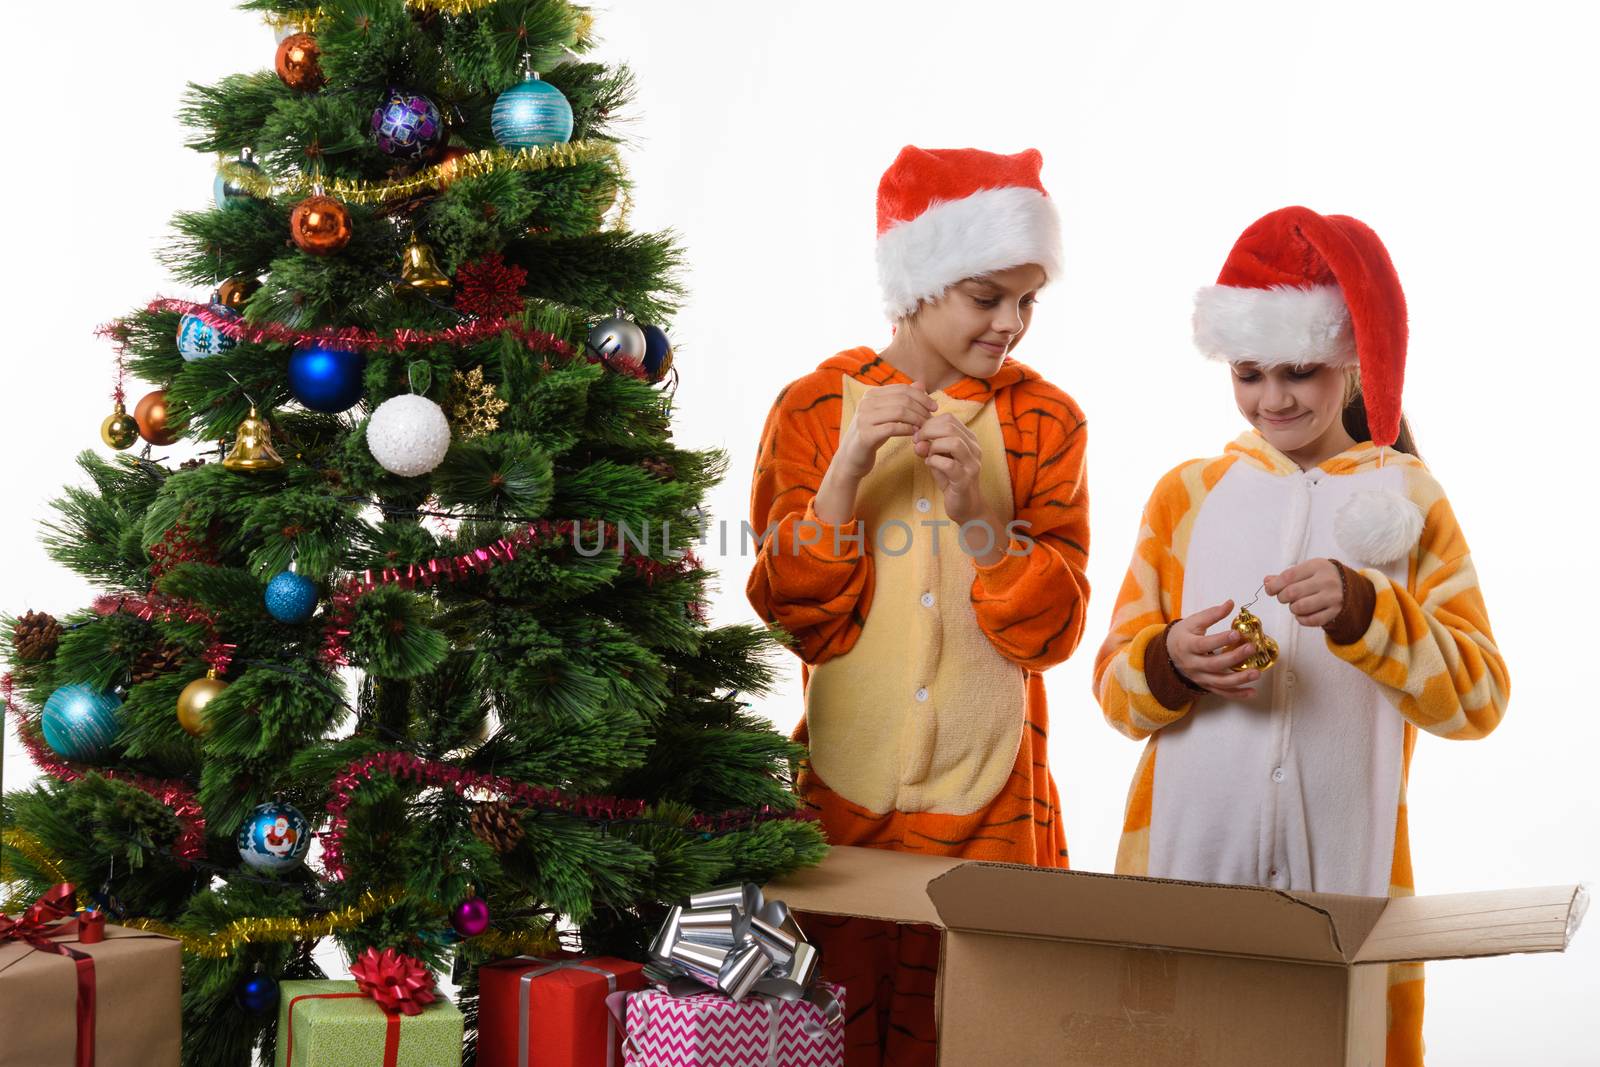 Girls examine New Year's toys decorating the Christmas tree